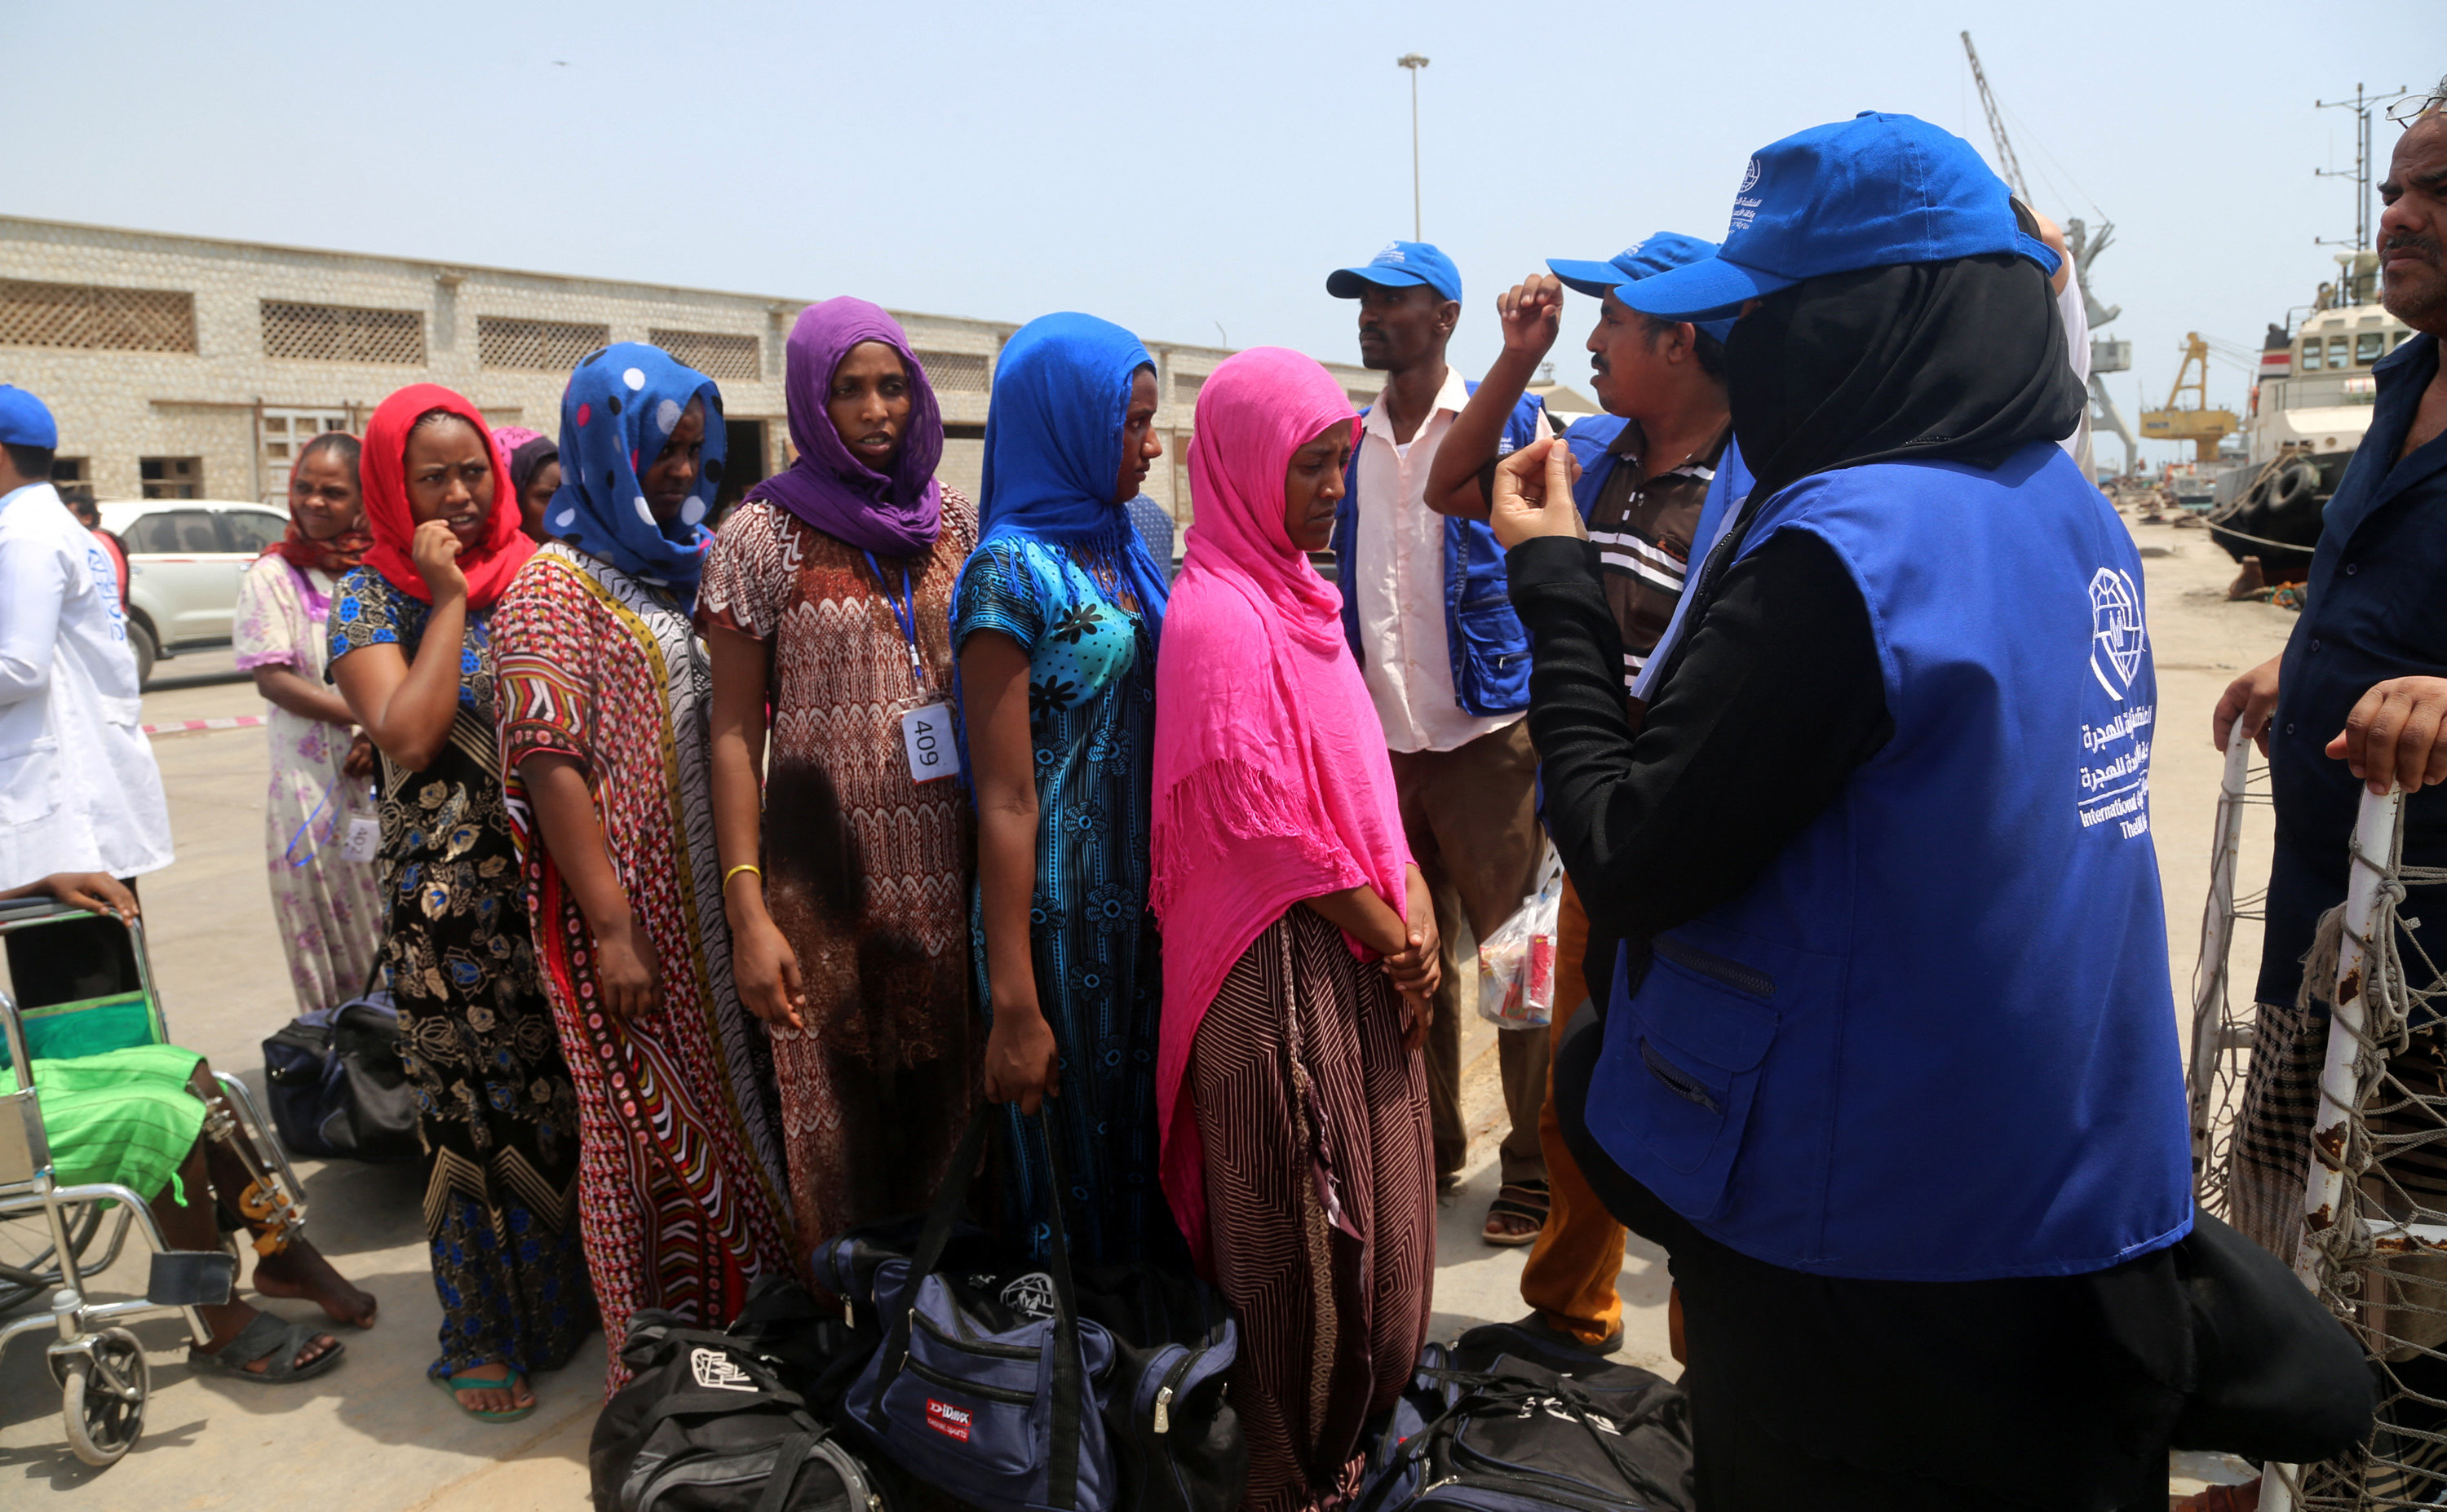 Employees of the International Organisation for Migration (IOM) assist Ethiopian migrants to board a ship repatriating them home in Yemen’s rebel-held Red Sea port of Hodeida in 2018. File photo: AFP